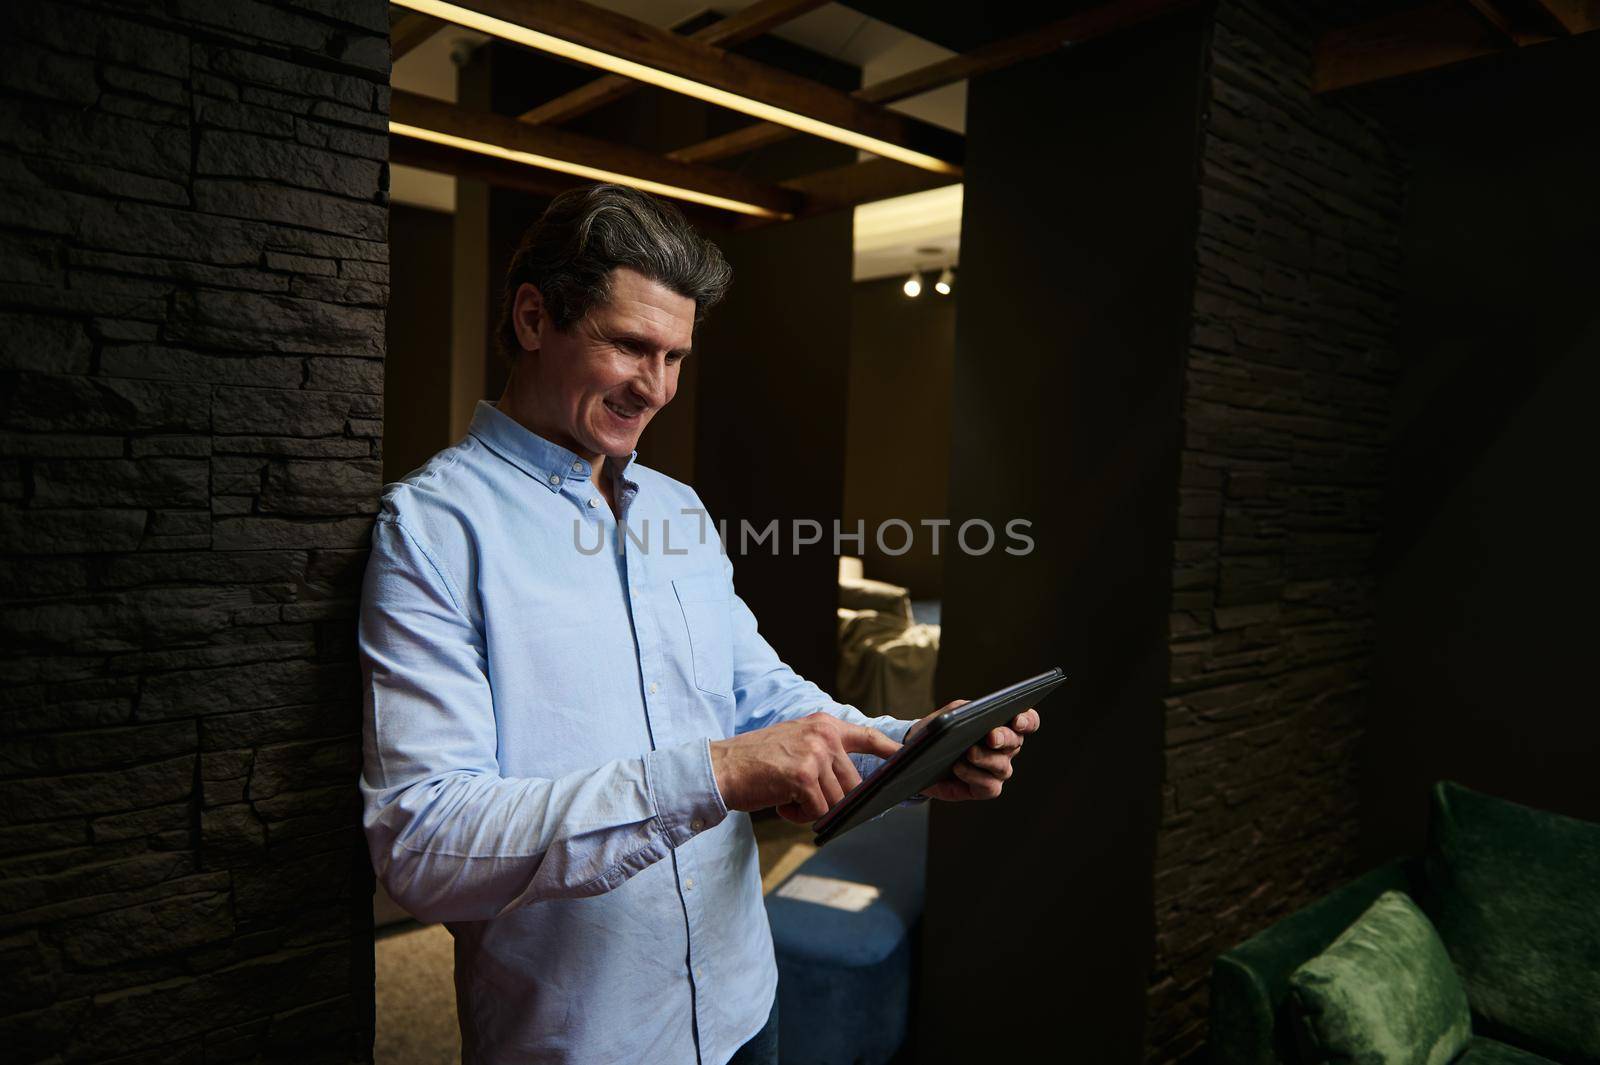 Prosperous sales man working at a furniture store, using digital tablet and checking orders of new upholstered furniture in an interior design store by artgf